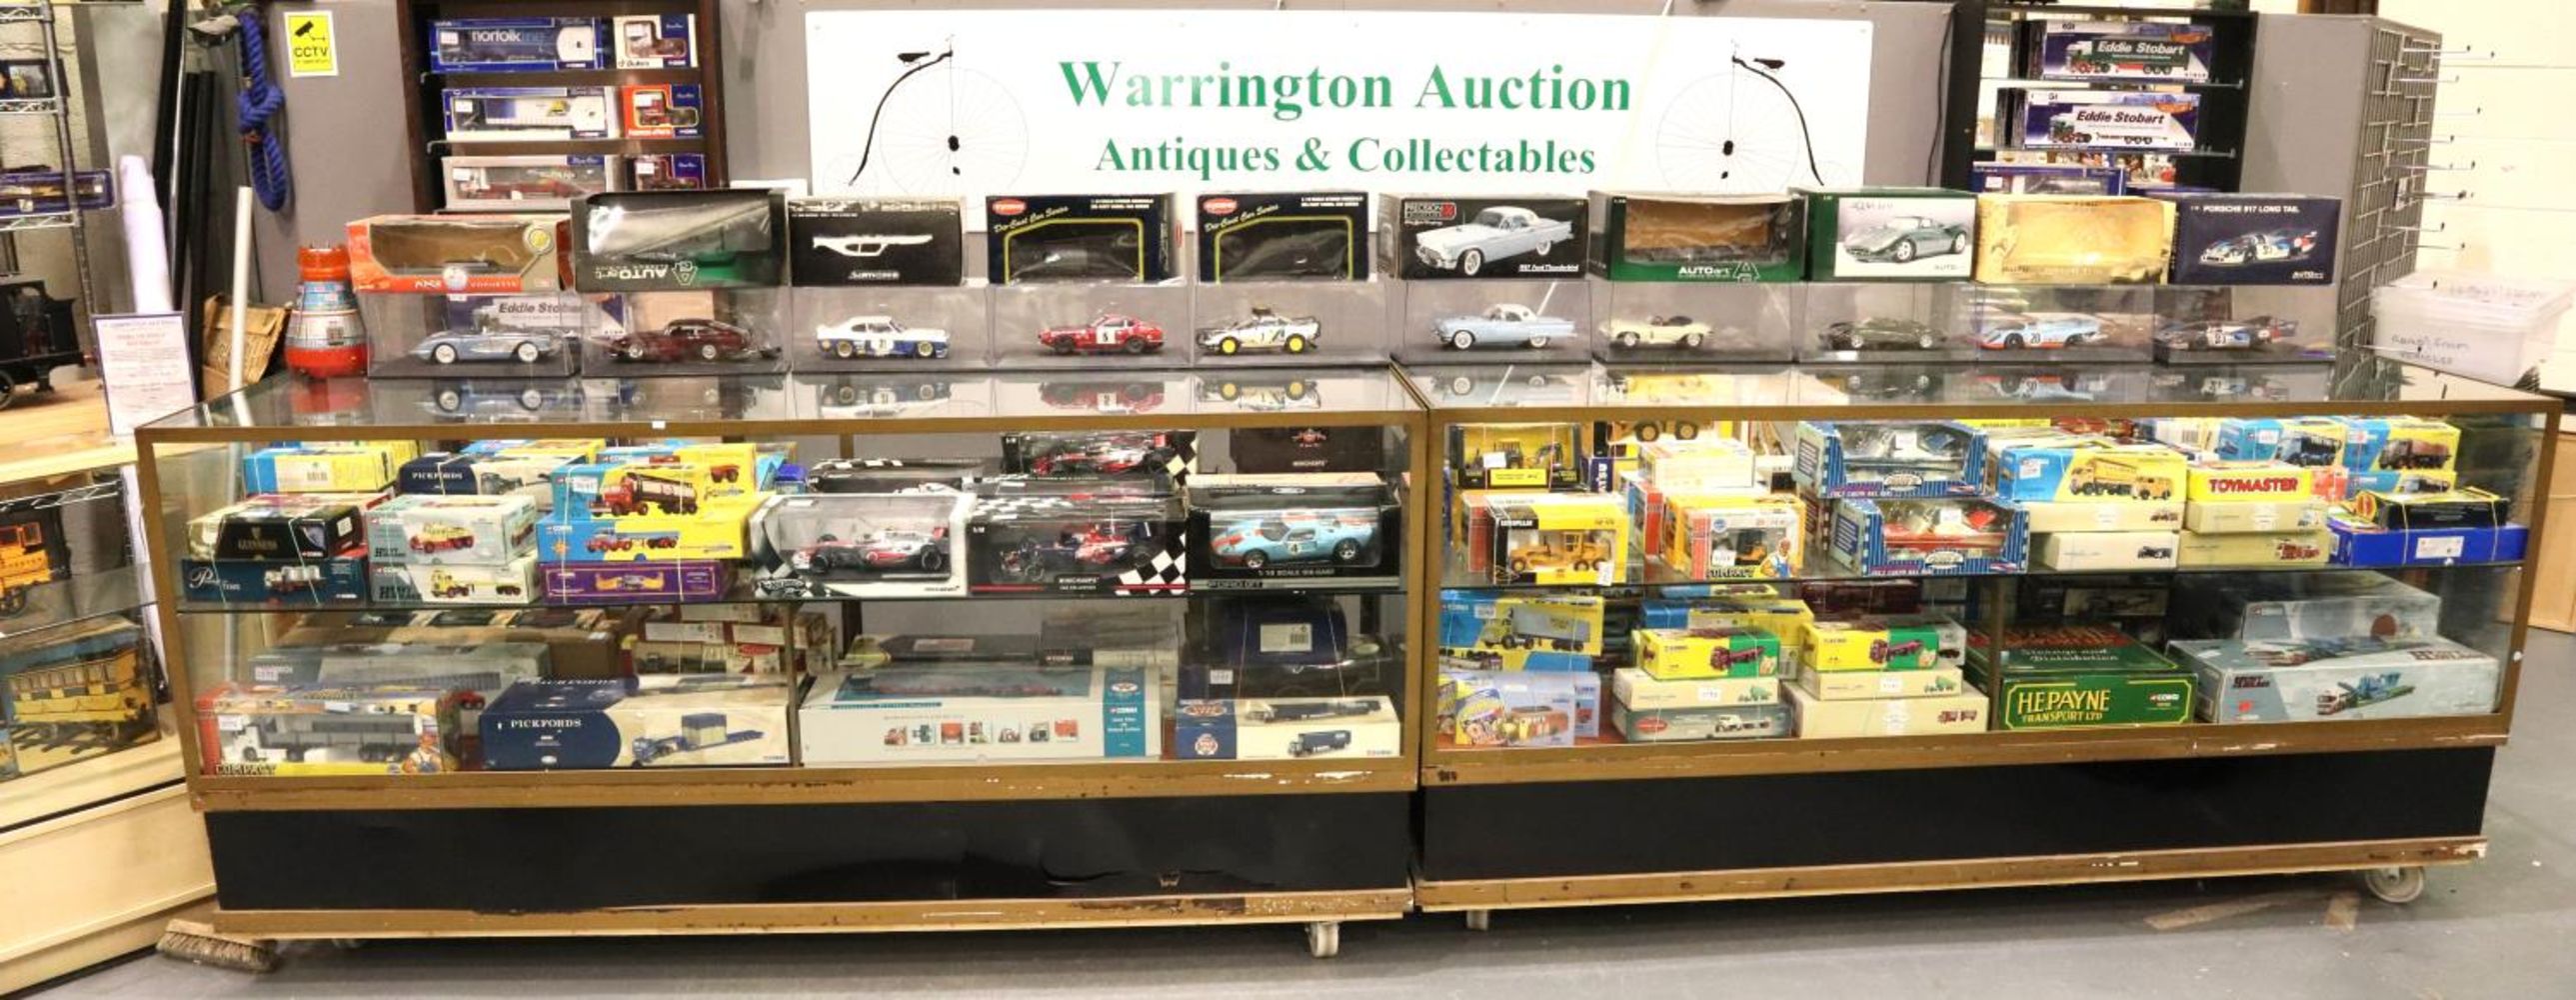 10AM START - The Toy, Games & Transport Sale